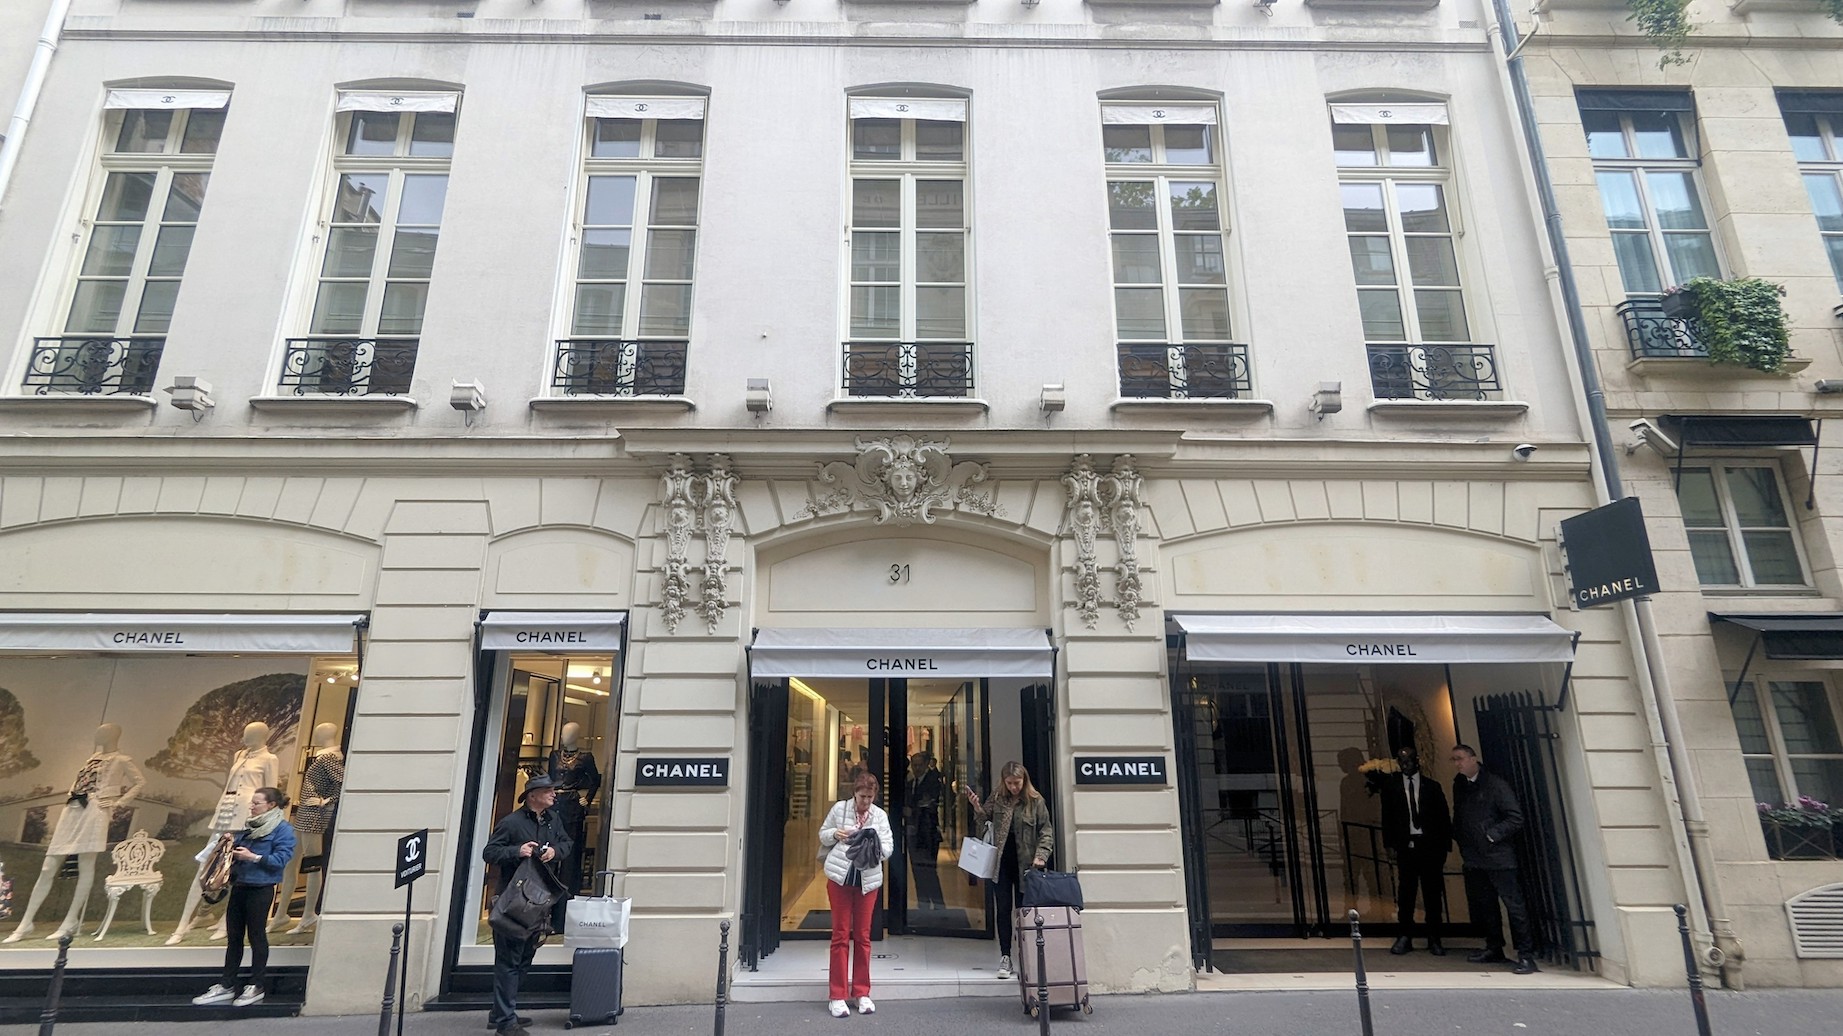 The world's oldest Chanel boutique and Coco Chanel's former home on Rue Cambronne viewed from the street.